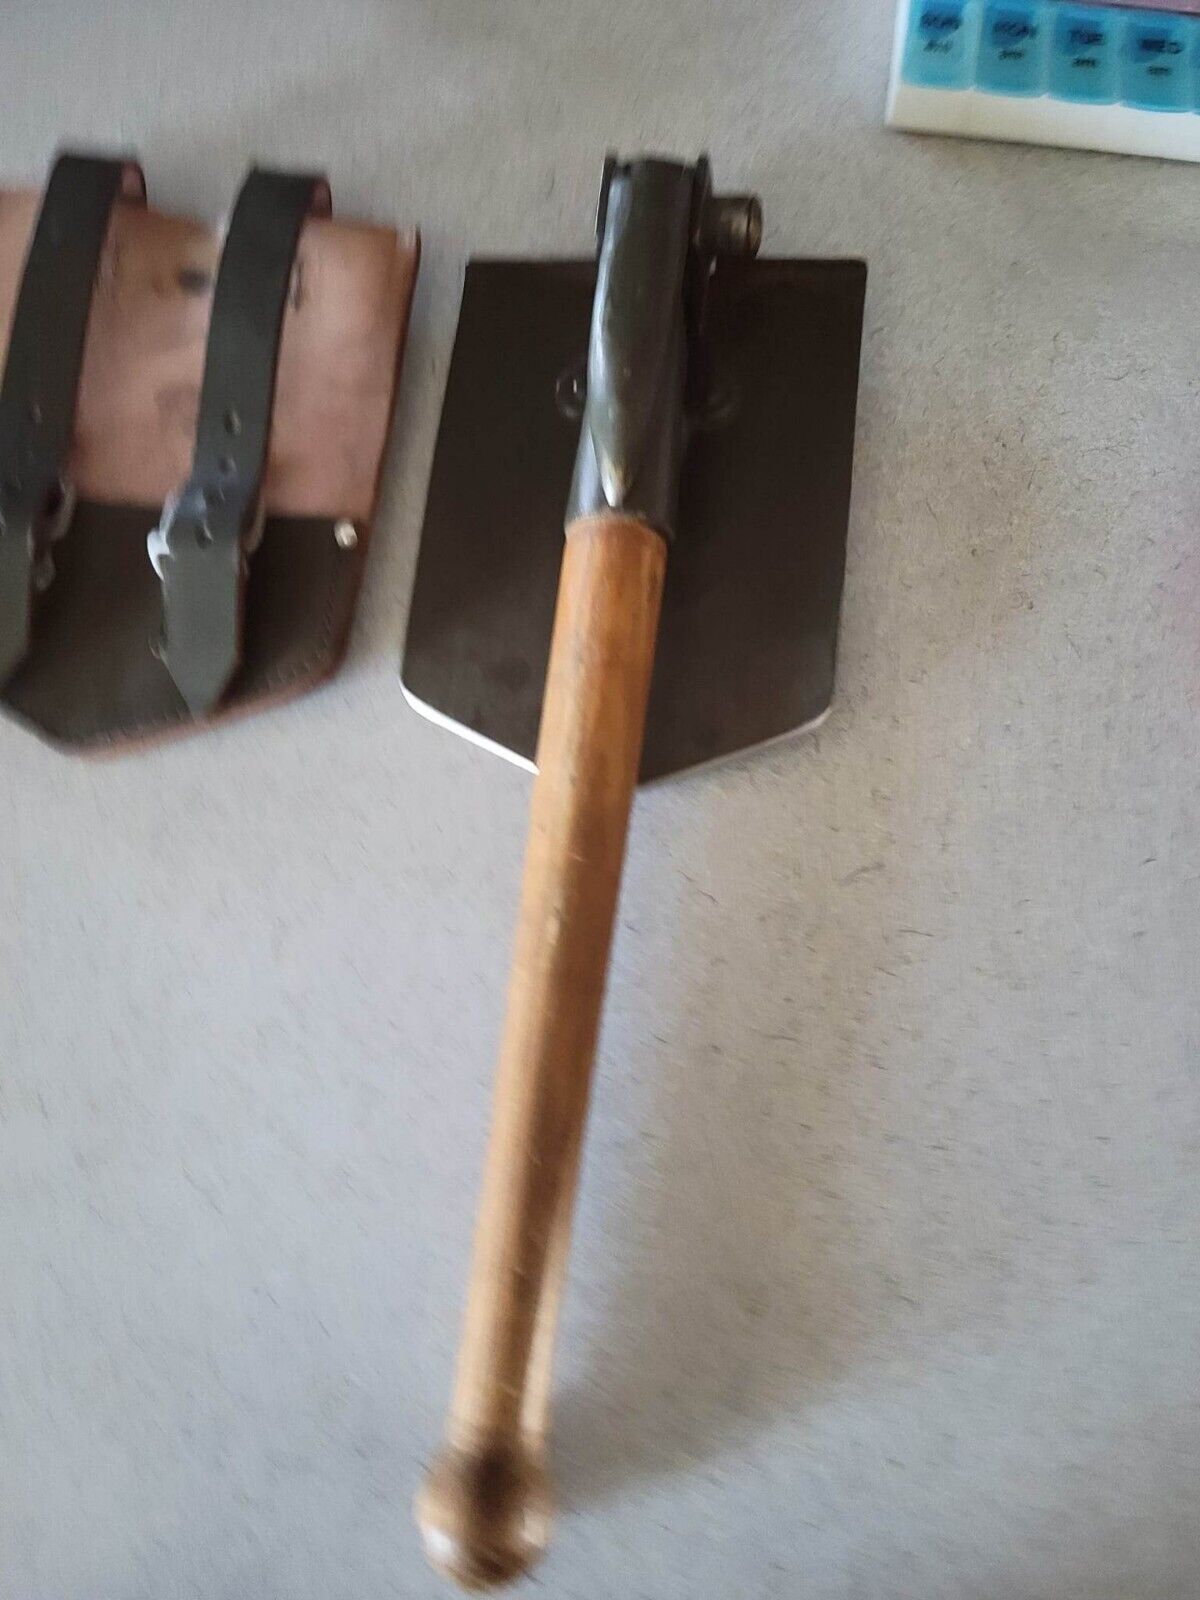 West German Army Folding Entrenching Tool Shovel With Leather Cover 1966